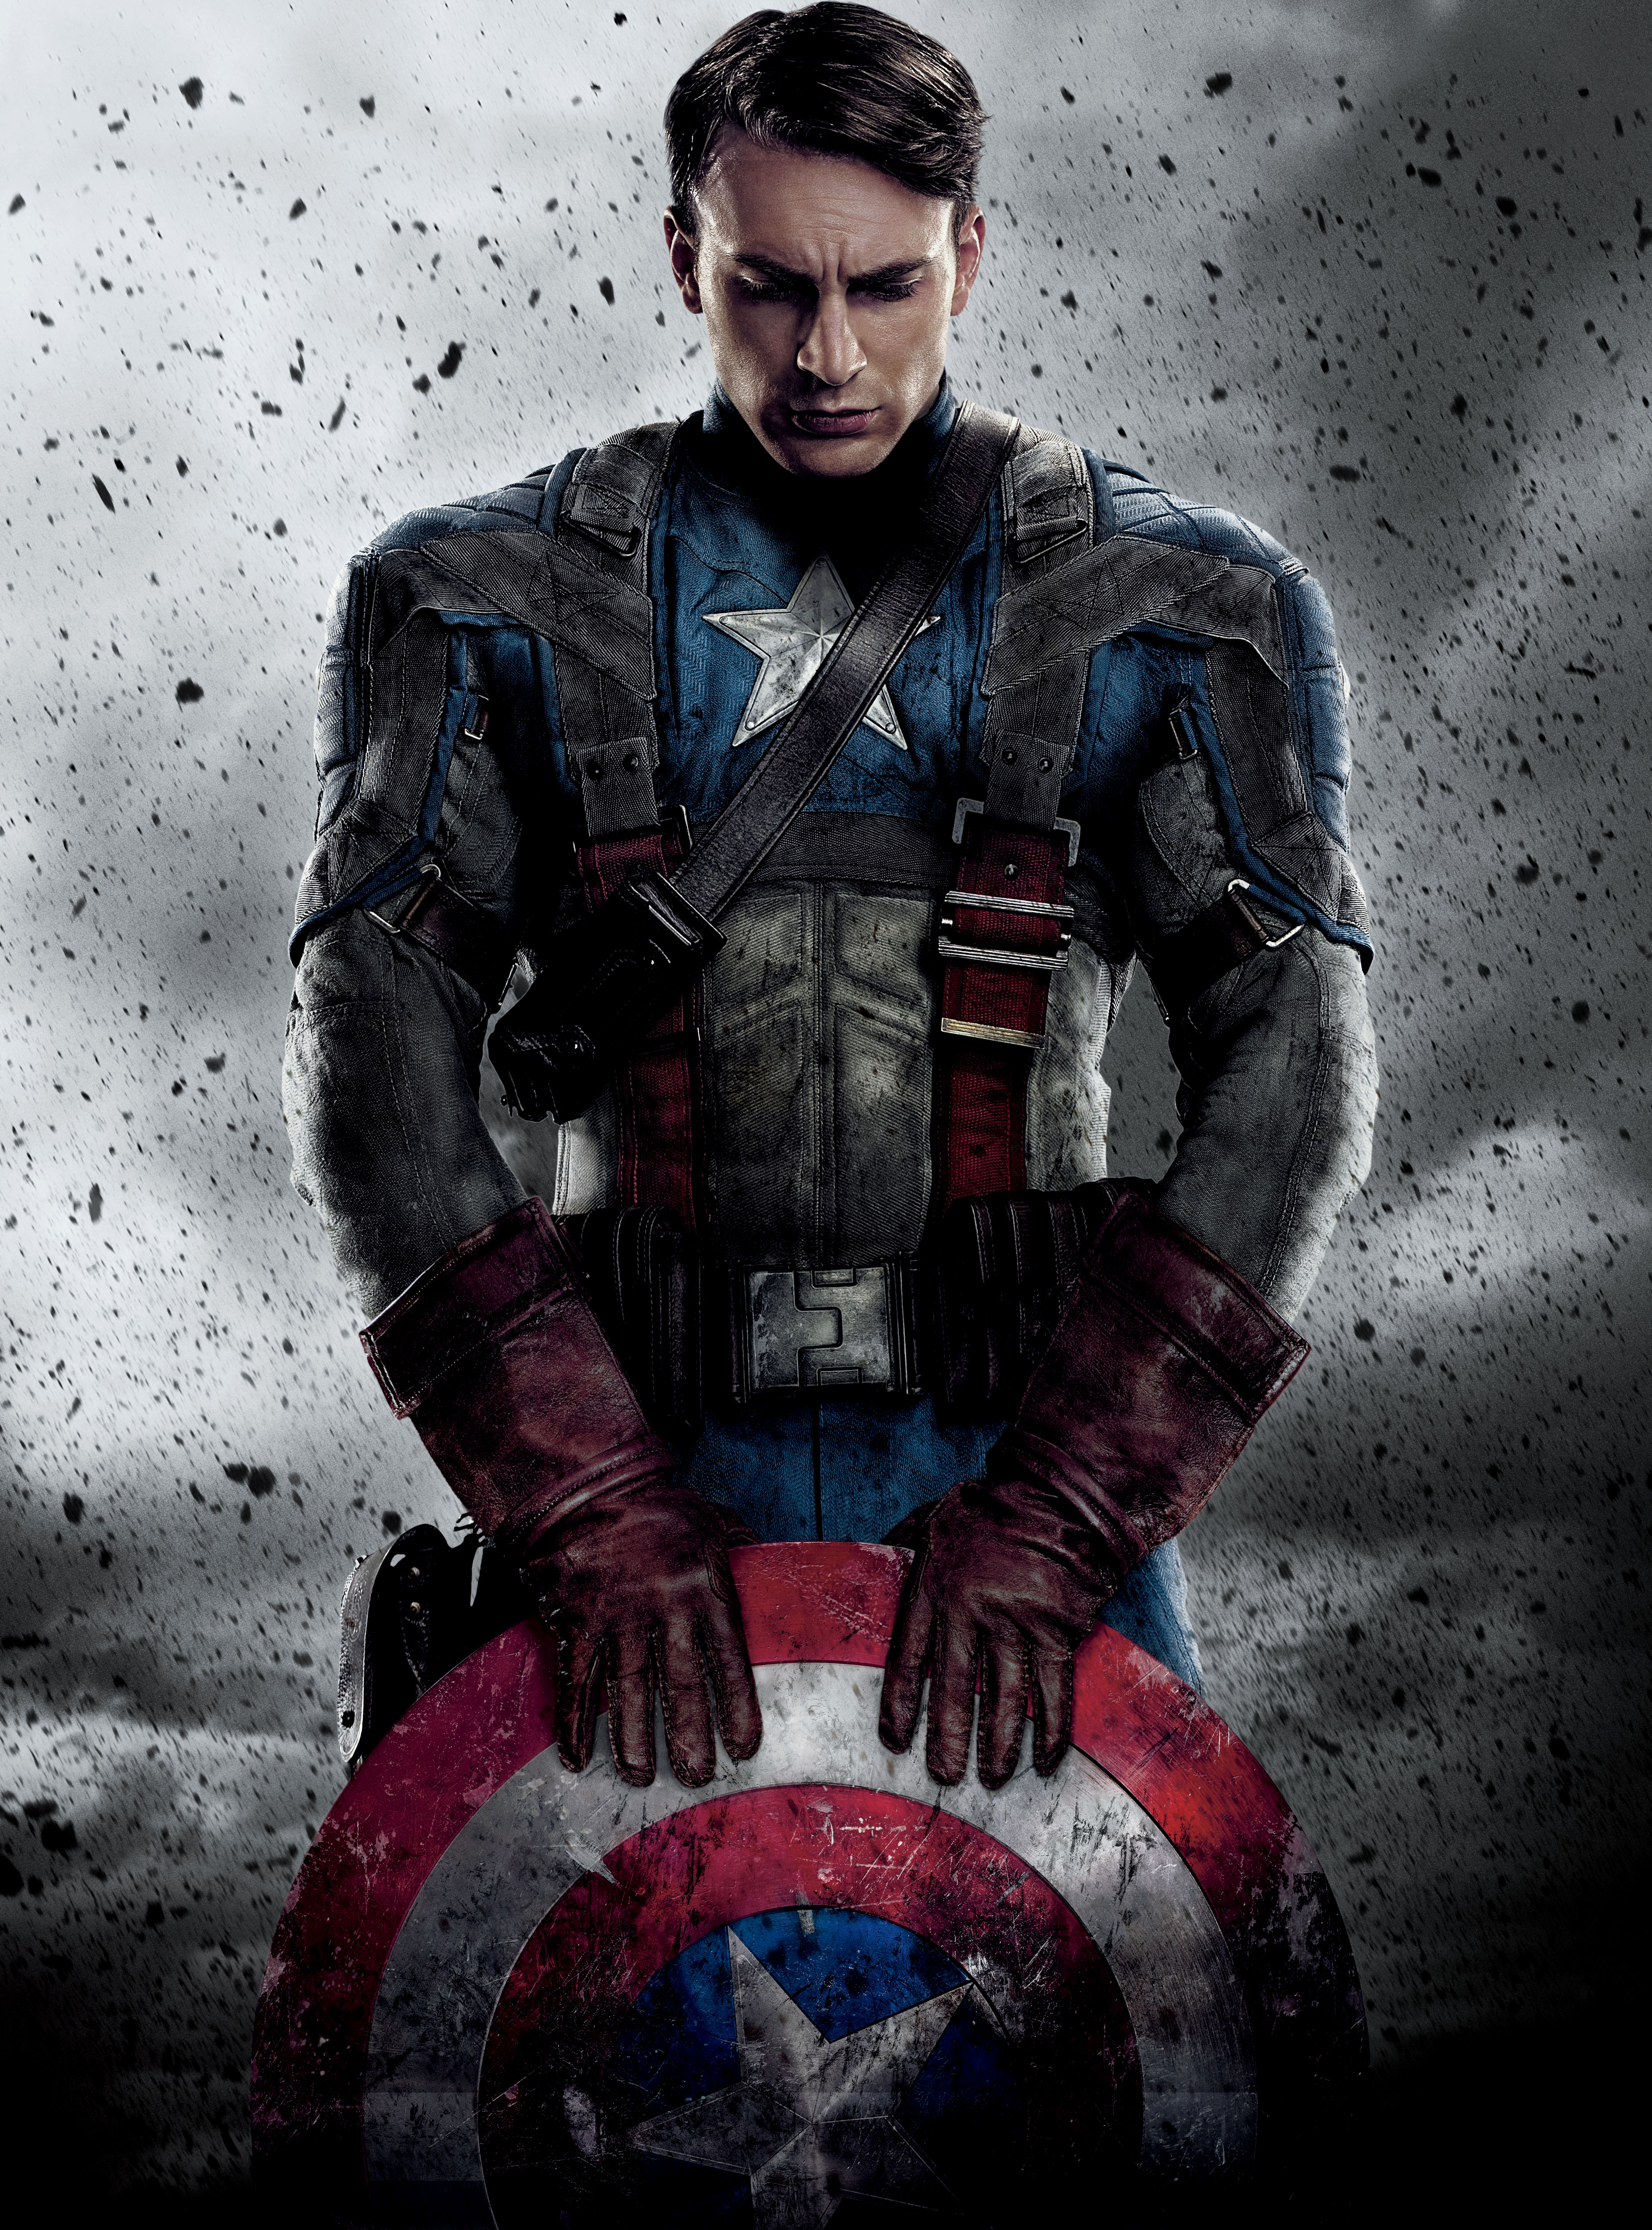 download free captain america first avenger